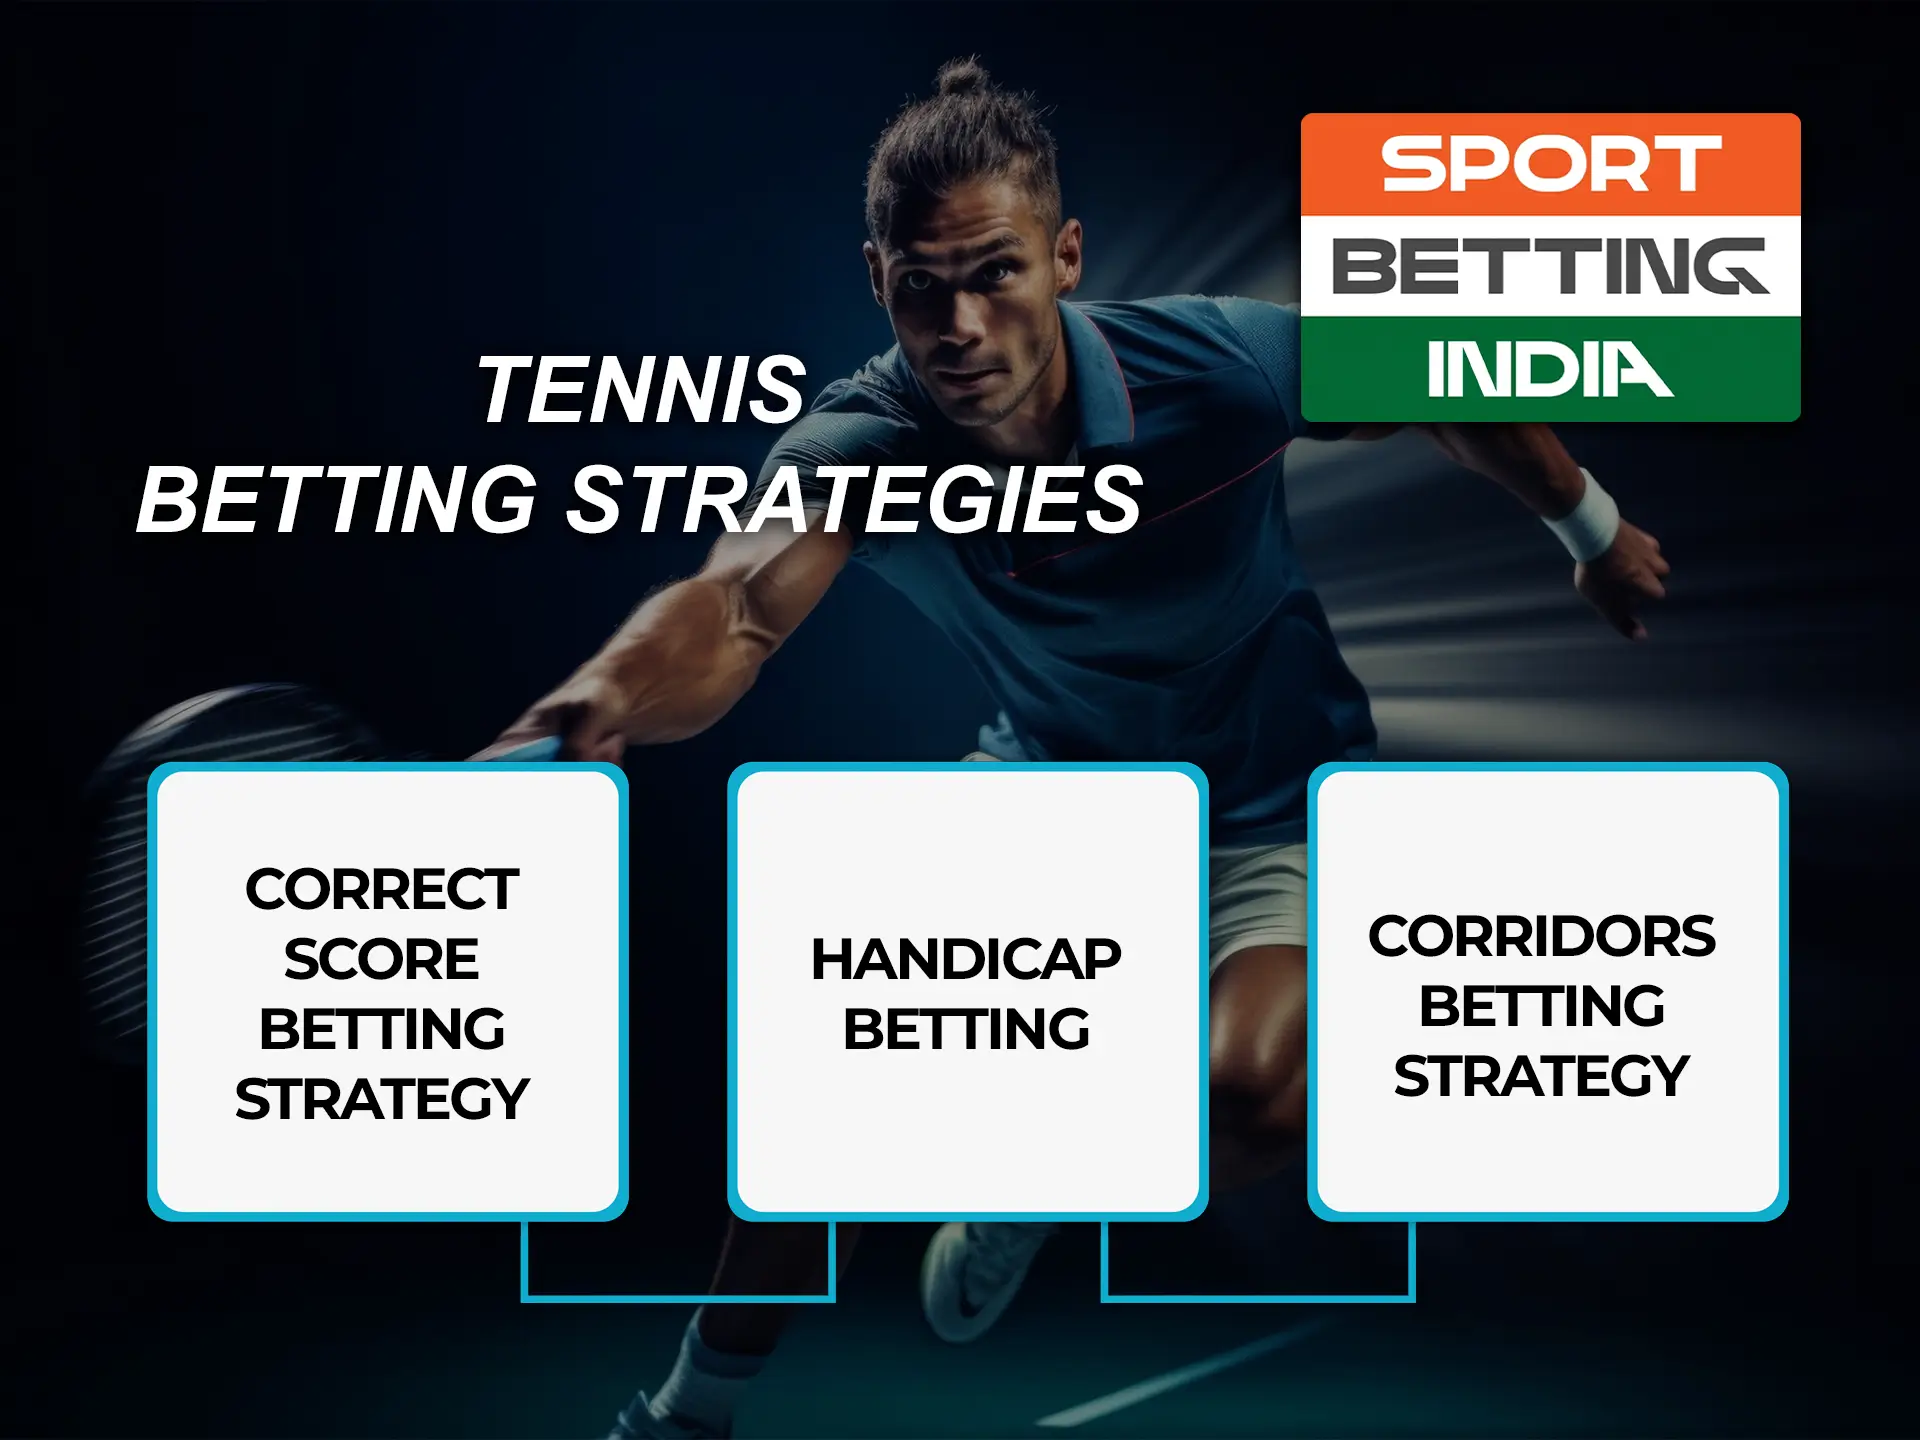 Choosing the right strategy for betting on tennis allows players to constantly win and achieve high results.